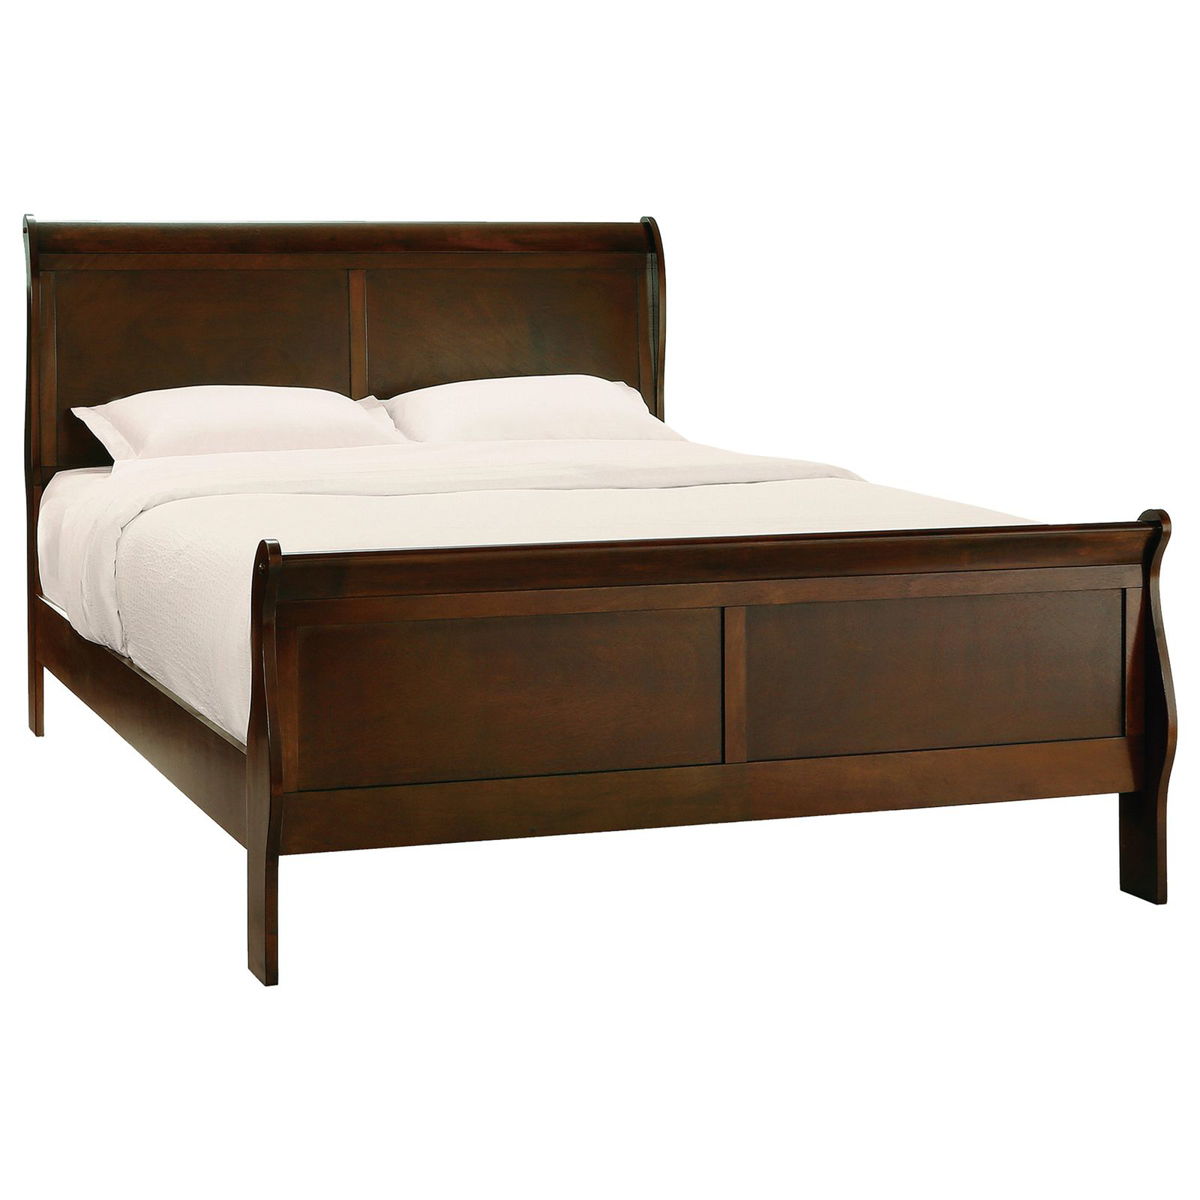 Picture of Mayville Cherry King Bed